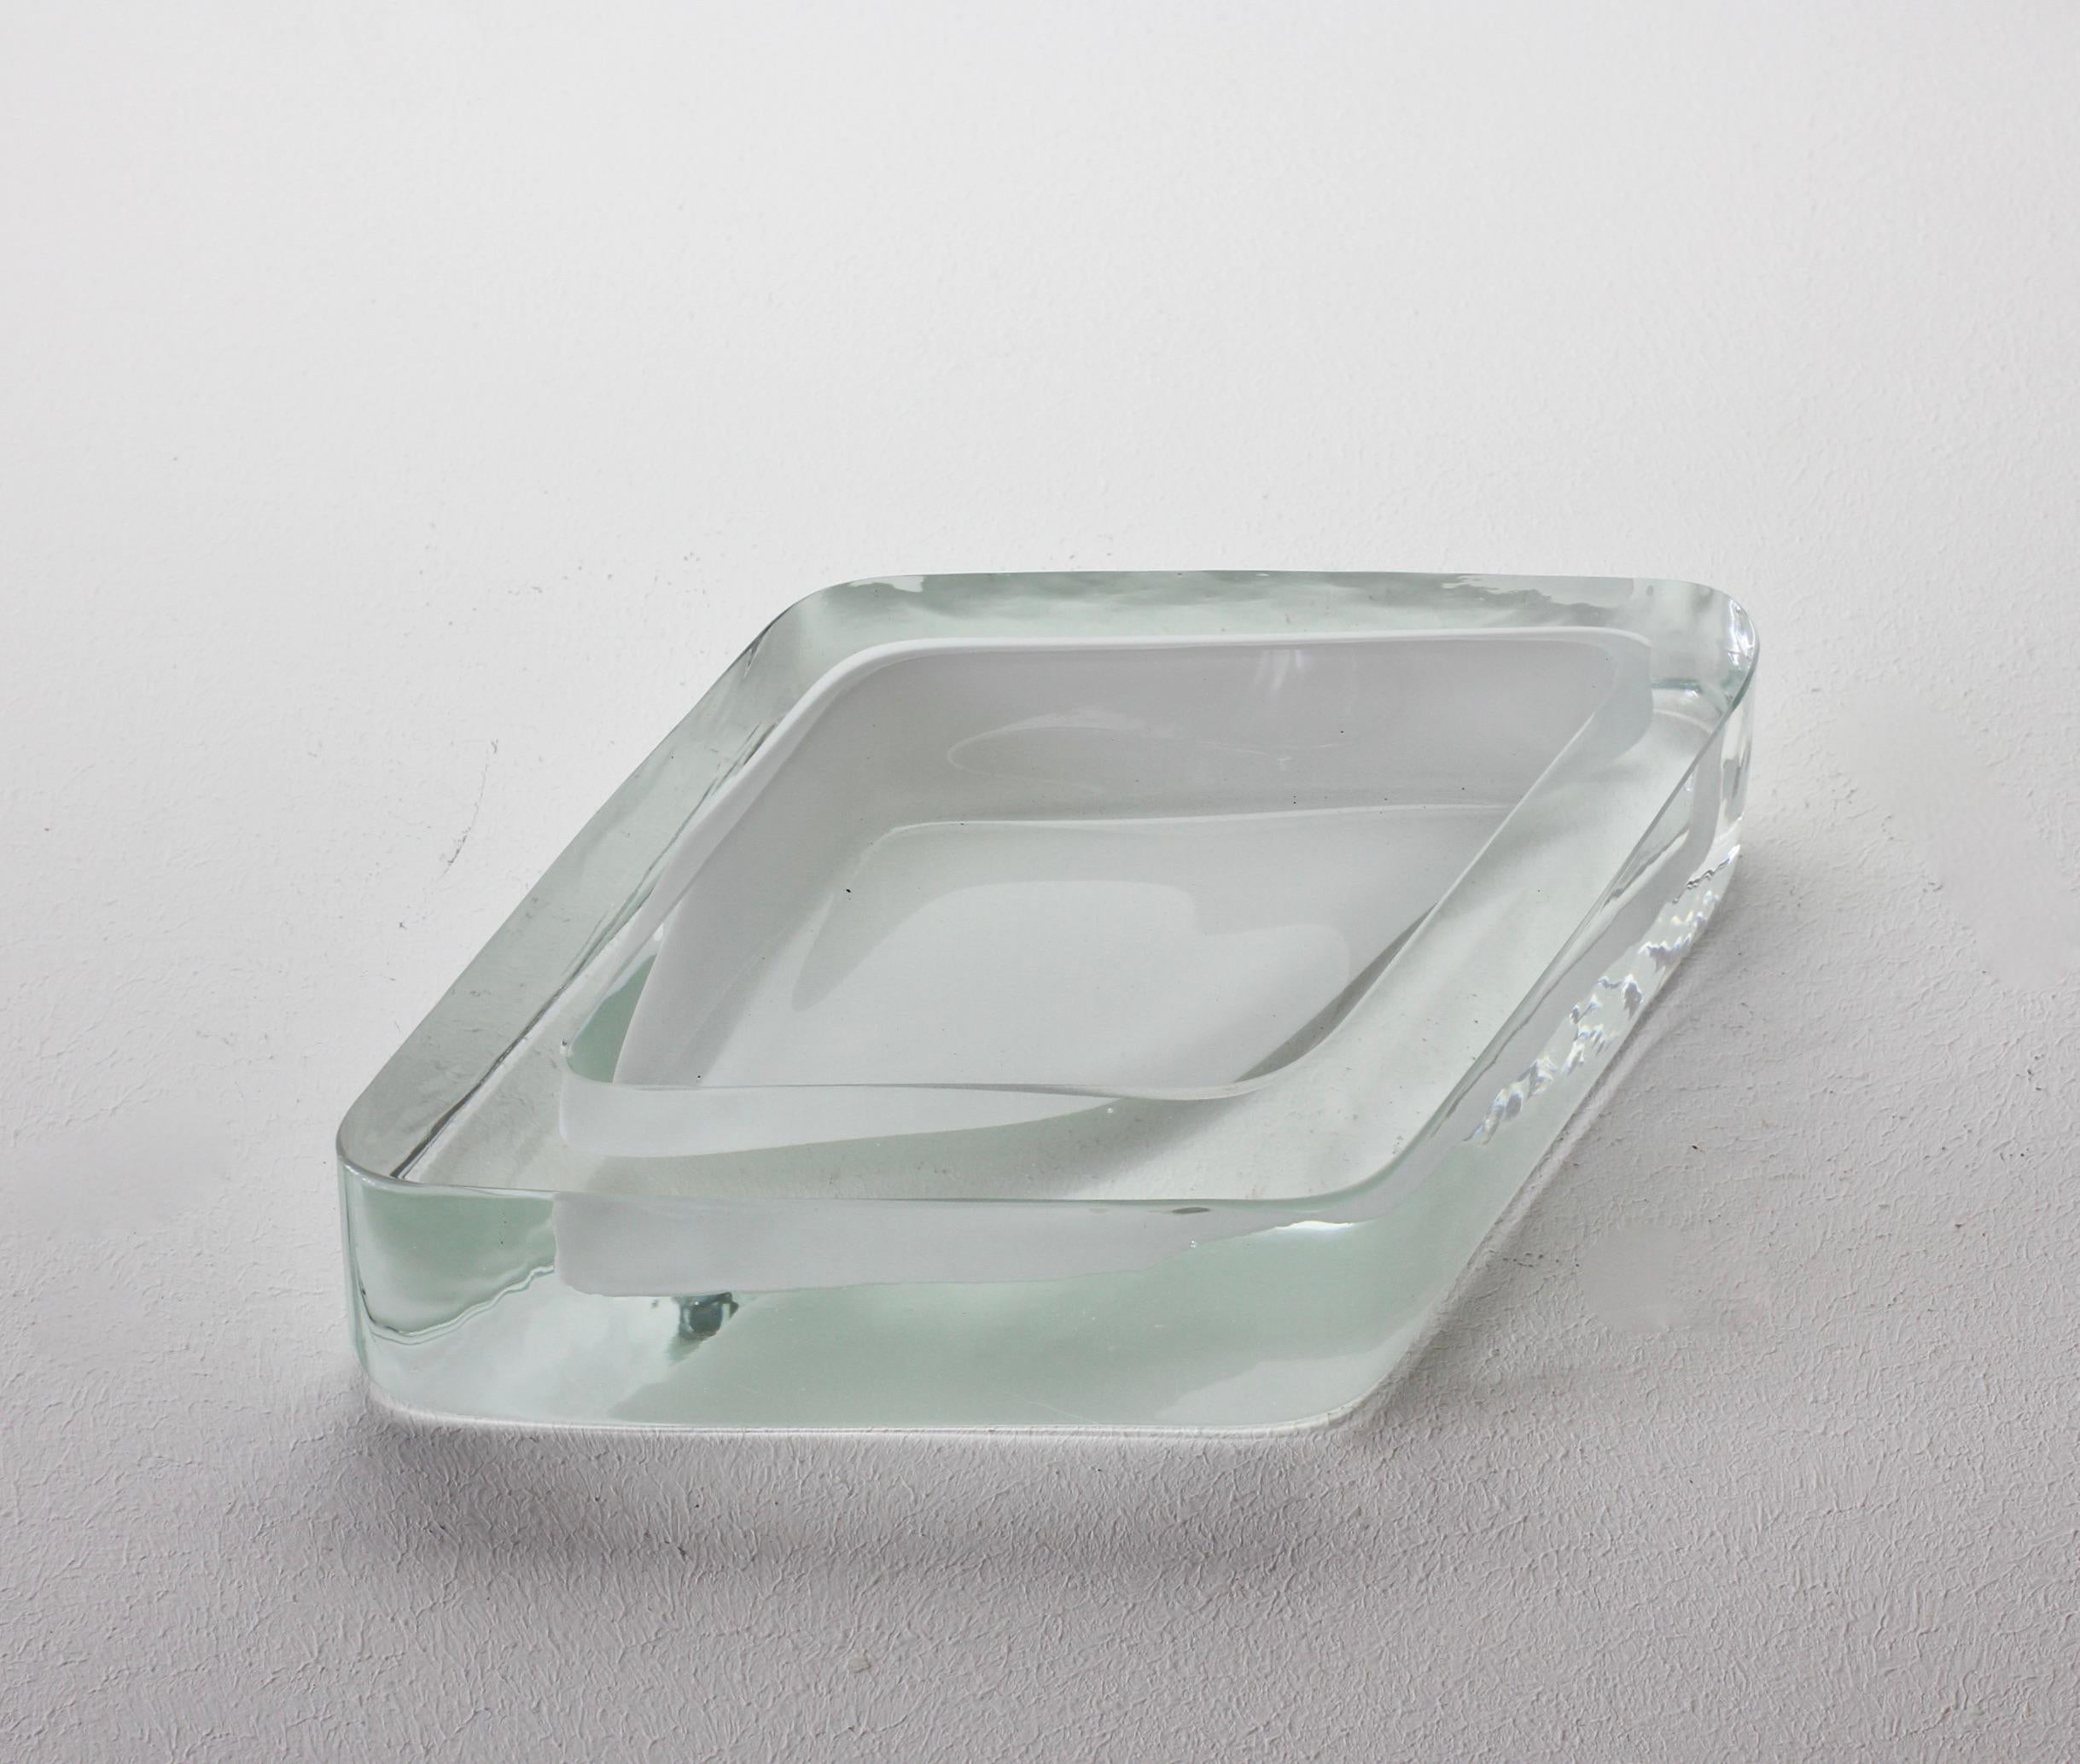 Antonio da Ros (attributed) for Cenedese large and heavy vintage midcentury modern Italian Murano glass rhombus shaped bowl, serving dish or ashtray, circa 1965-1975. Large and heavy piece of glass features an geometric design with clear glass with